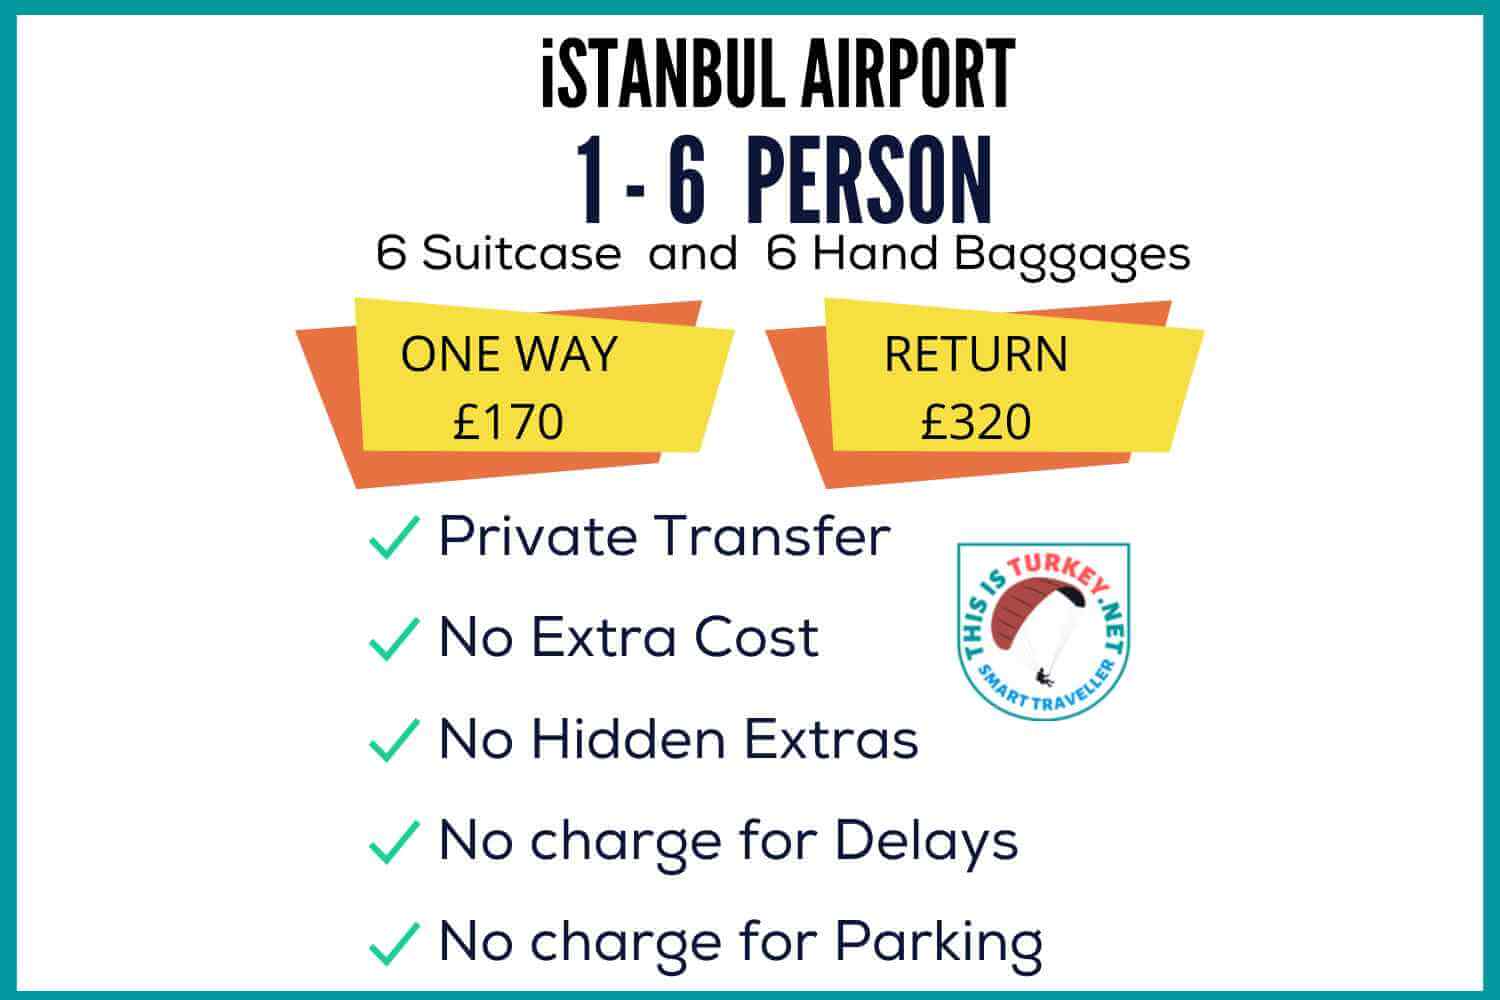 Our Private Transfer service to Hotels from istanbul Airport comes with no extra cost and hidden extras. All our Airport Transfer vehicles are comfortable and Airconditioned, and drivers are experienced locals.